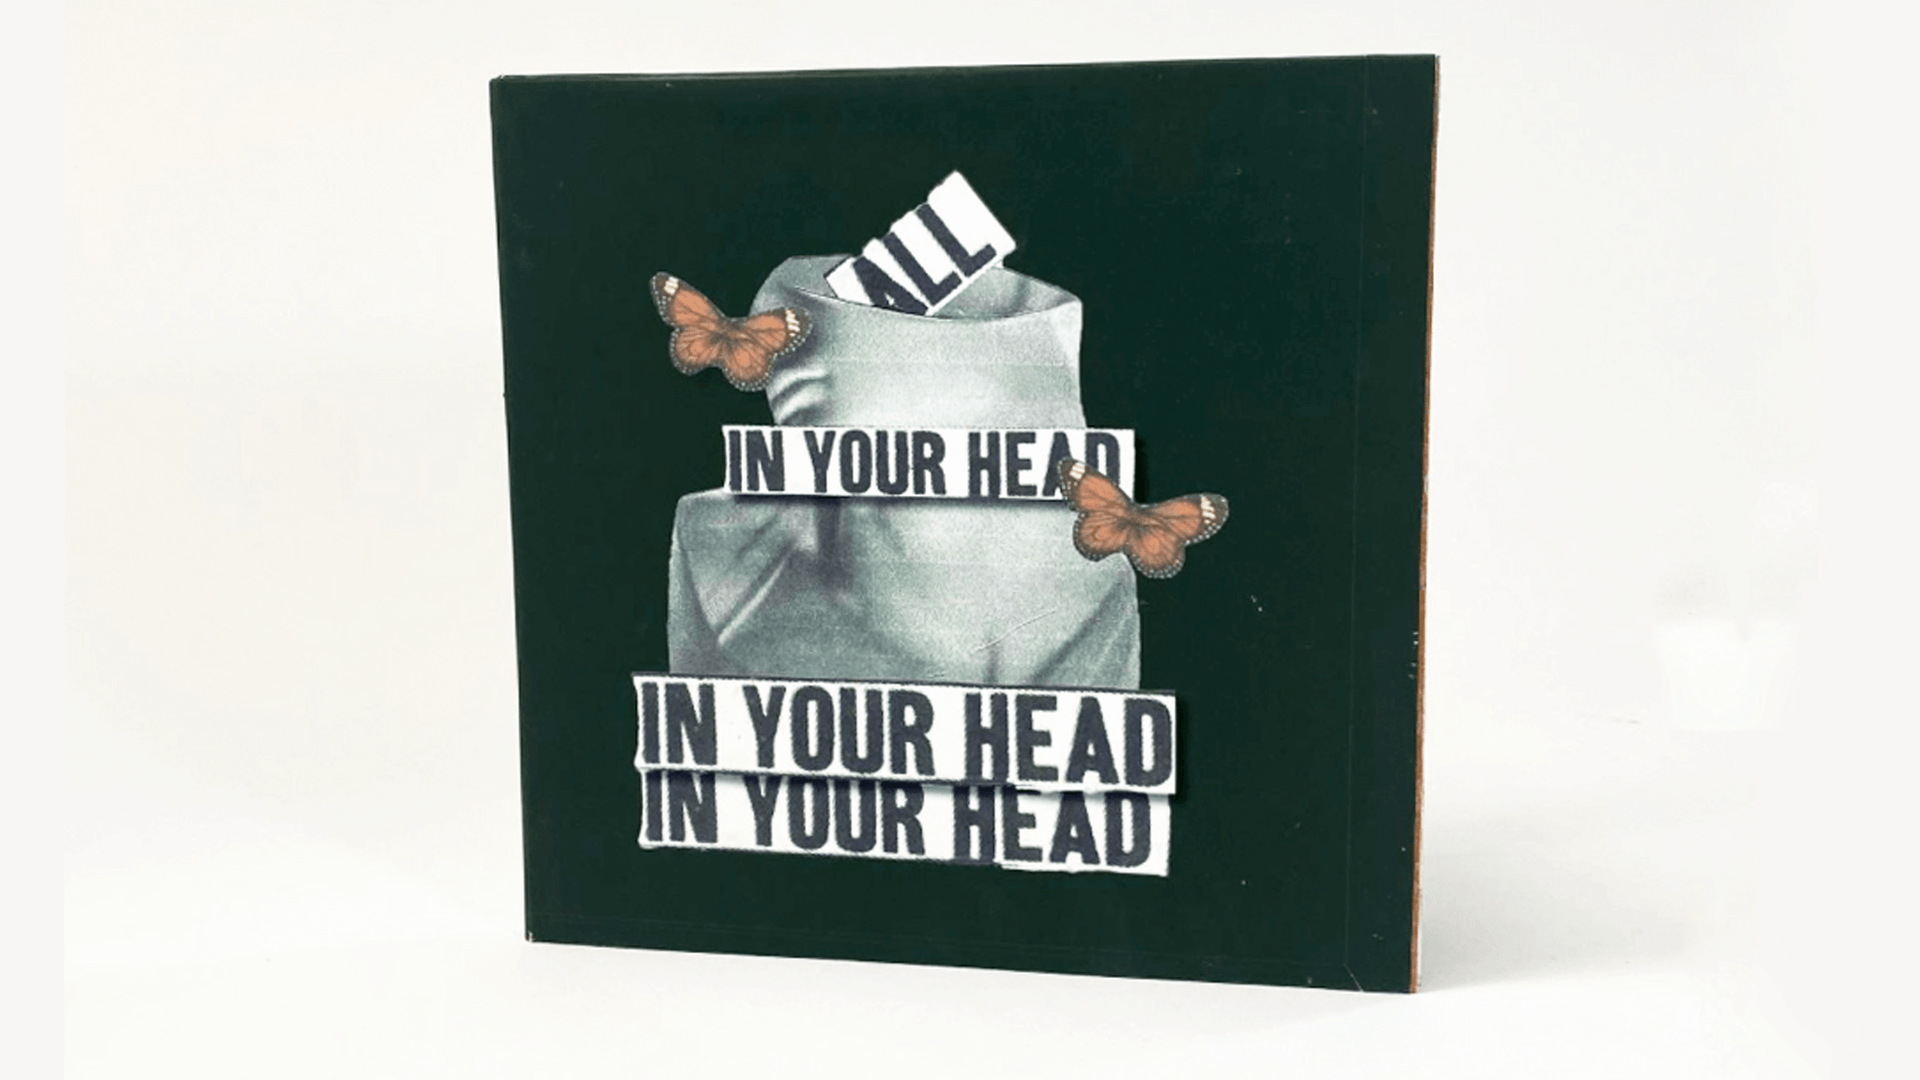 ALL IN YOUR HEAD